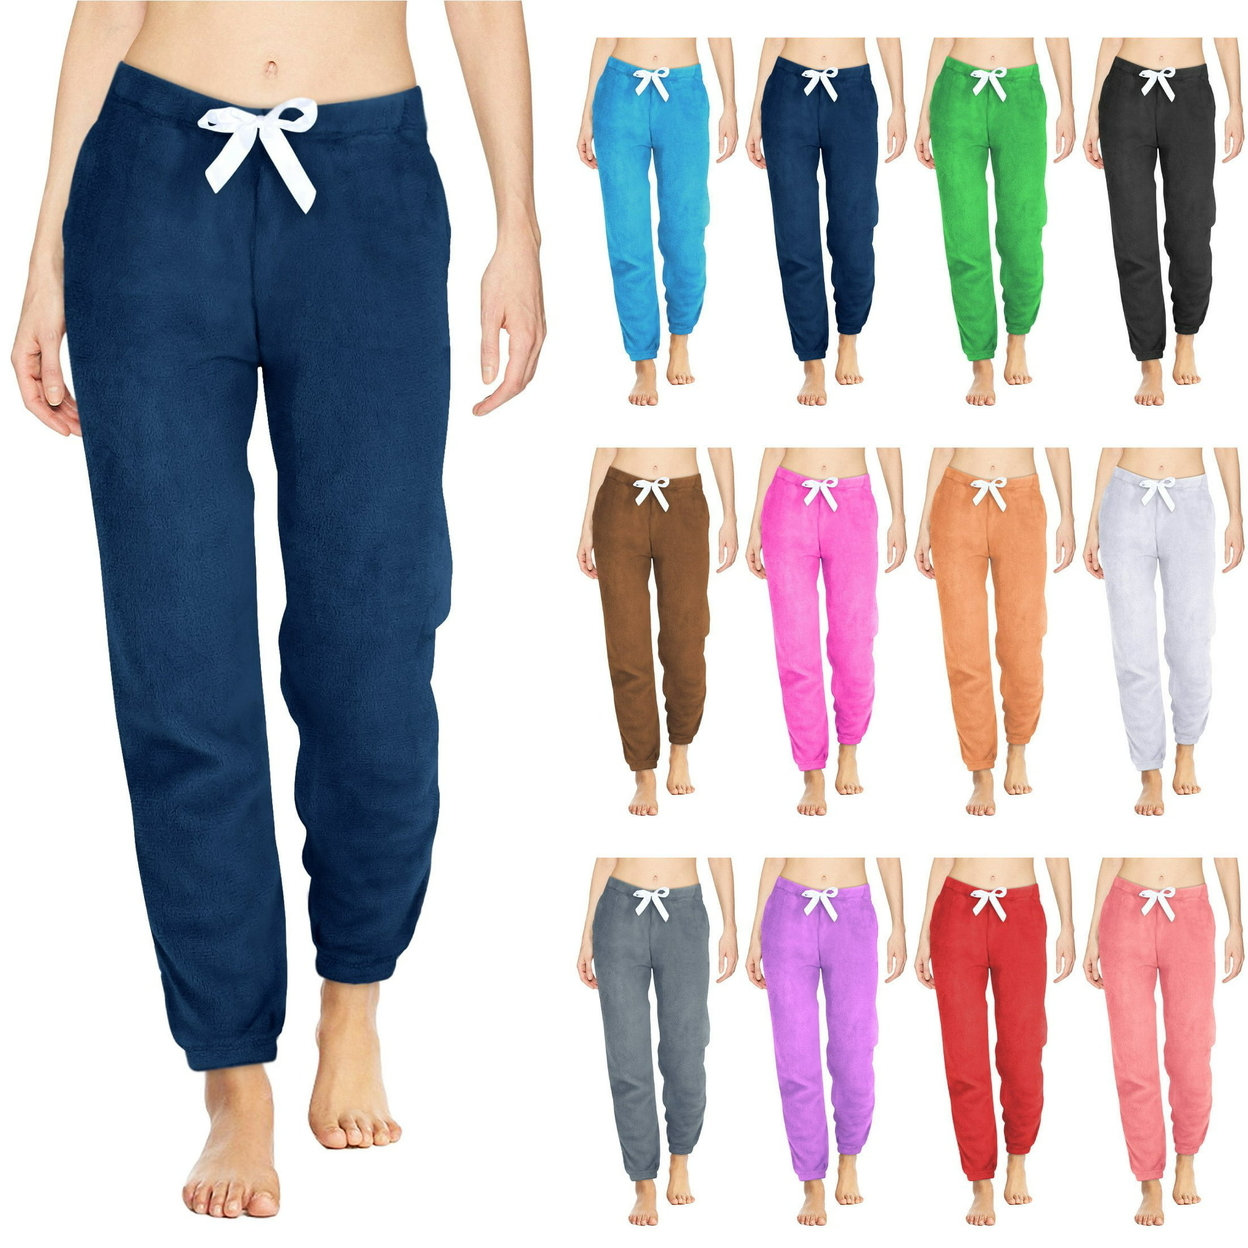 Multi-Pack: Women's Solid & Printed Ultra-Soft Comfy Stretch Micro-Fleece Pajama Lounge Pants - 3-pack, Large, Love